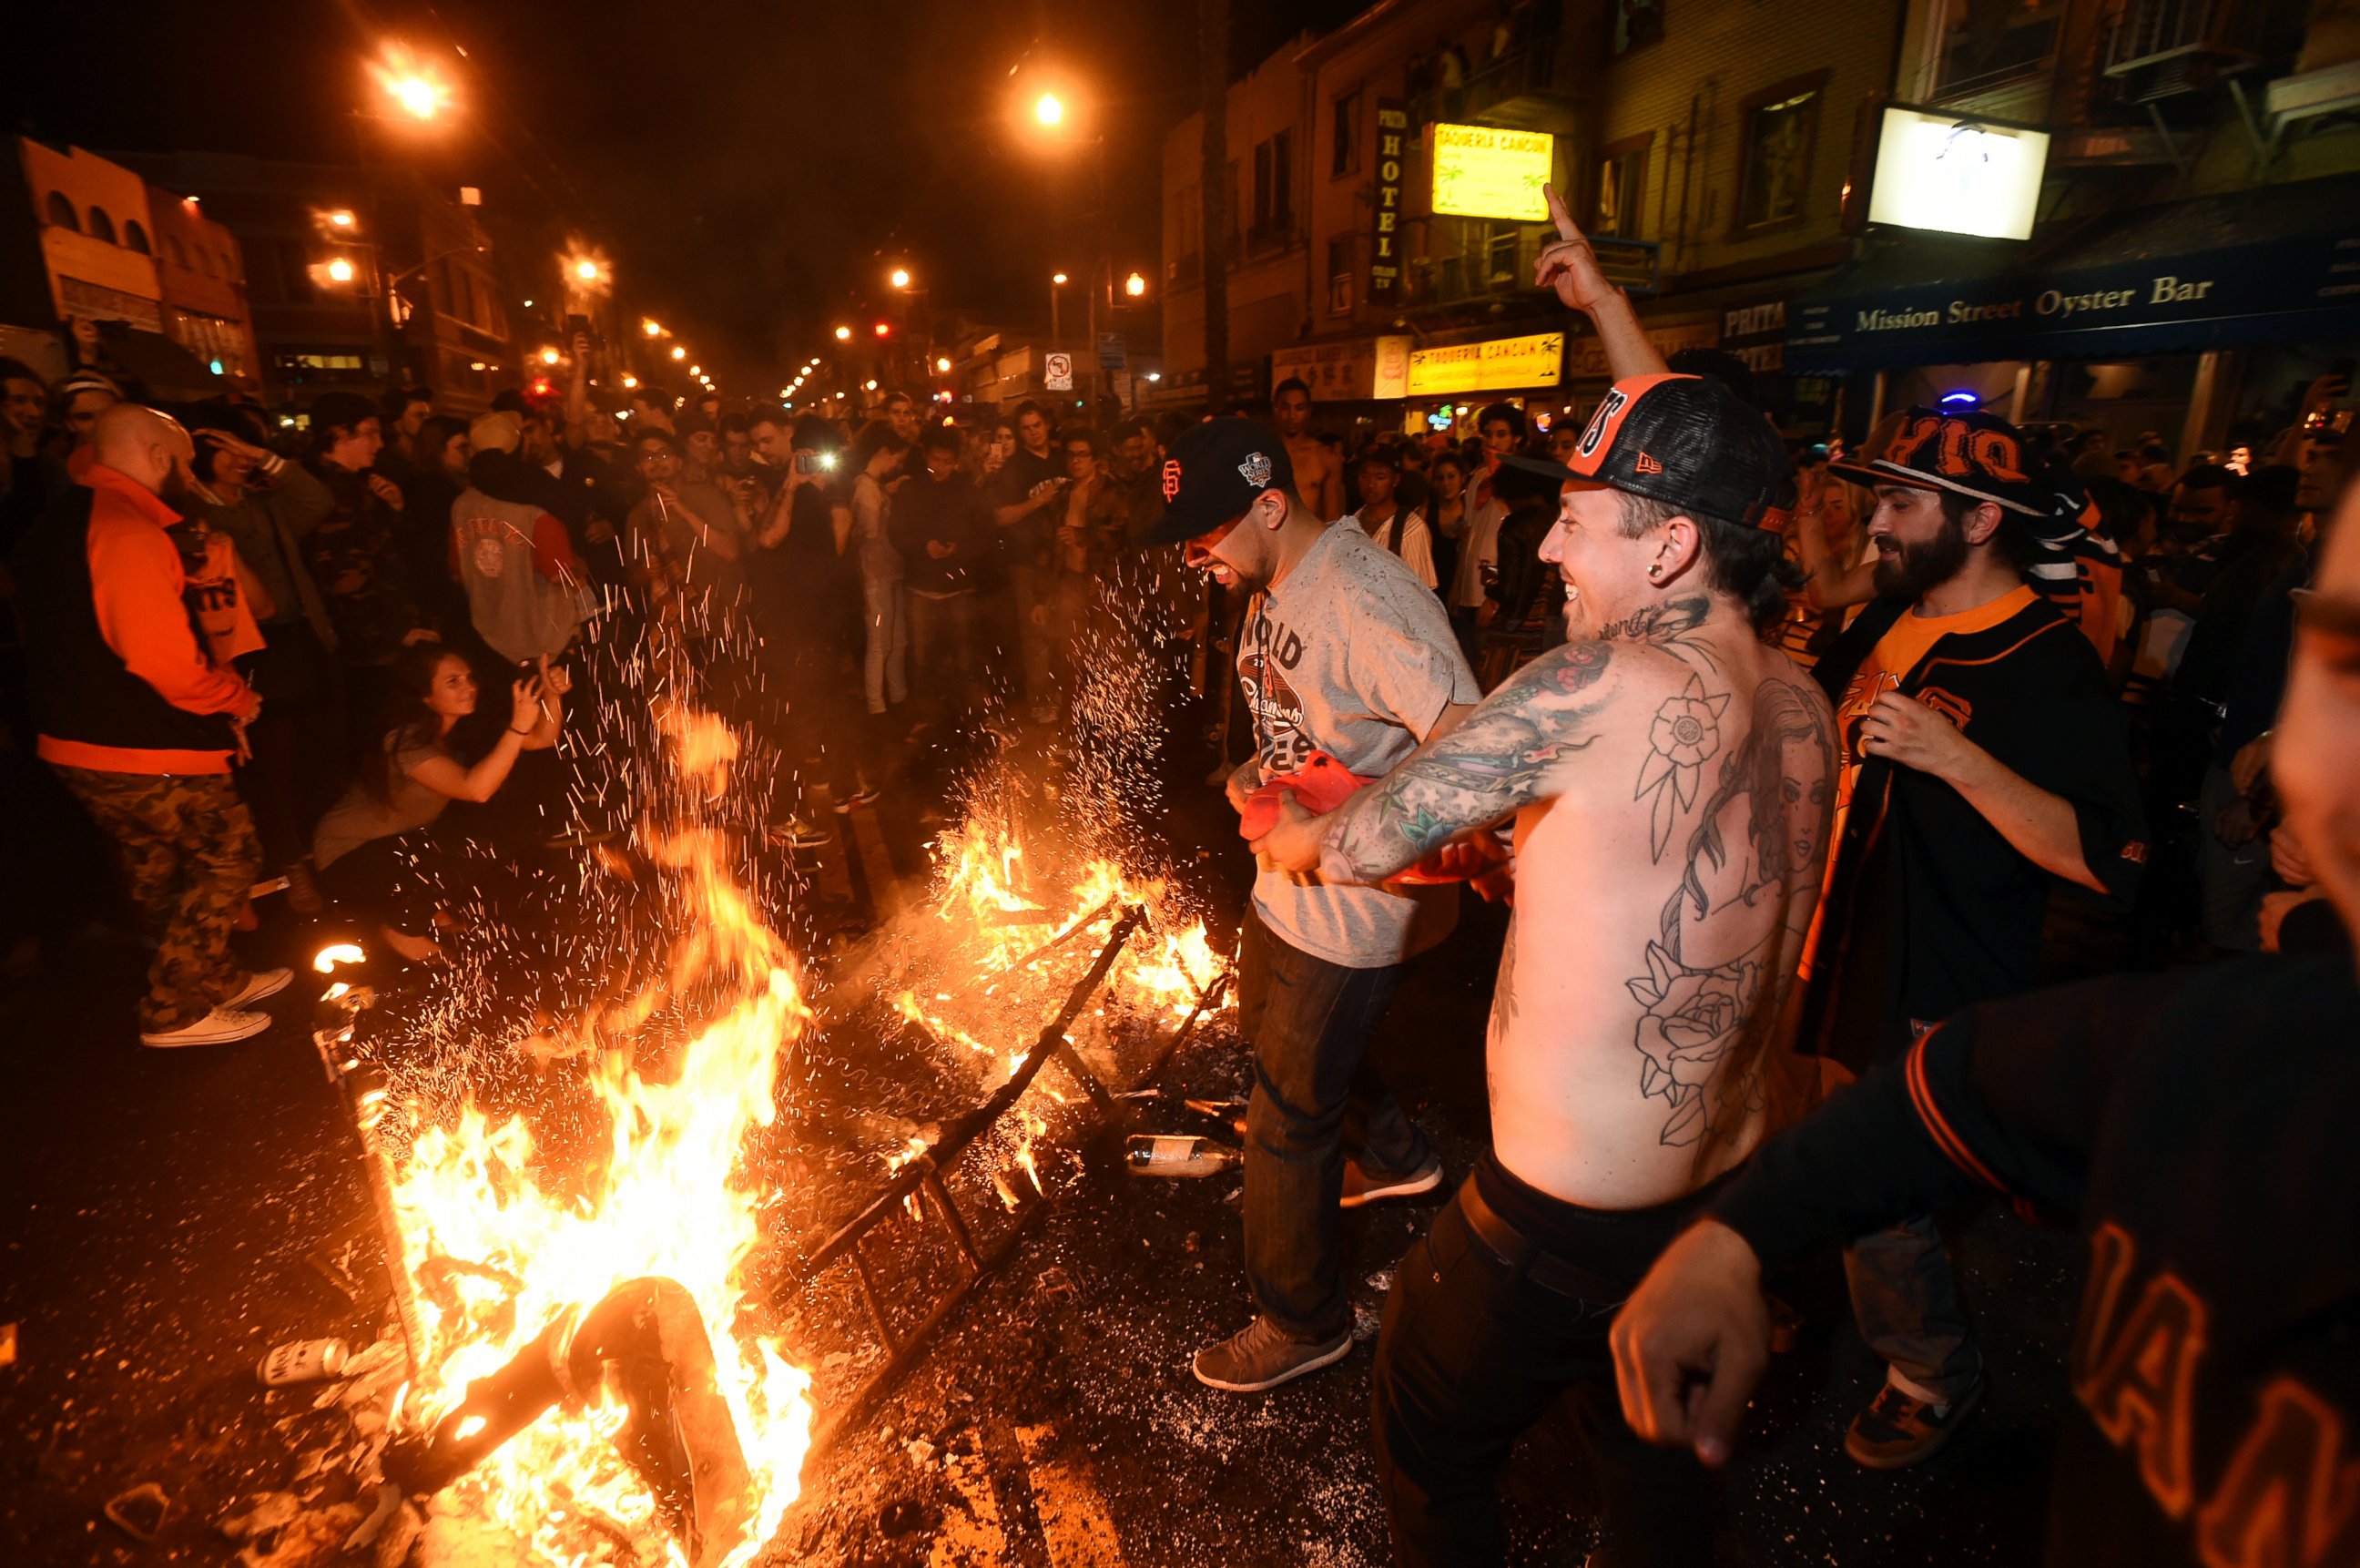 San Francisco Giants fans celebrate next to debris that has been set on fire in the Mission district after the San Francisco Giants beat the Kansas City Royals to win the World Series on Wednesday, Oct. 29, 2014, in San Francisco.